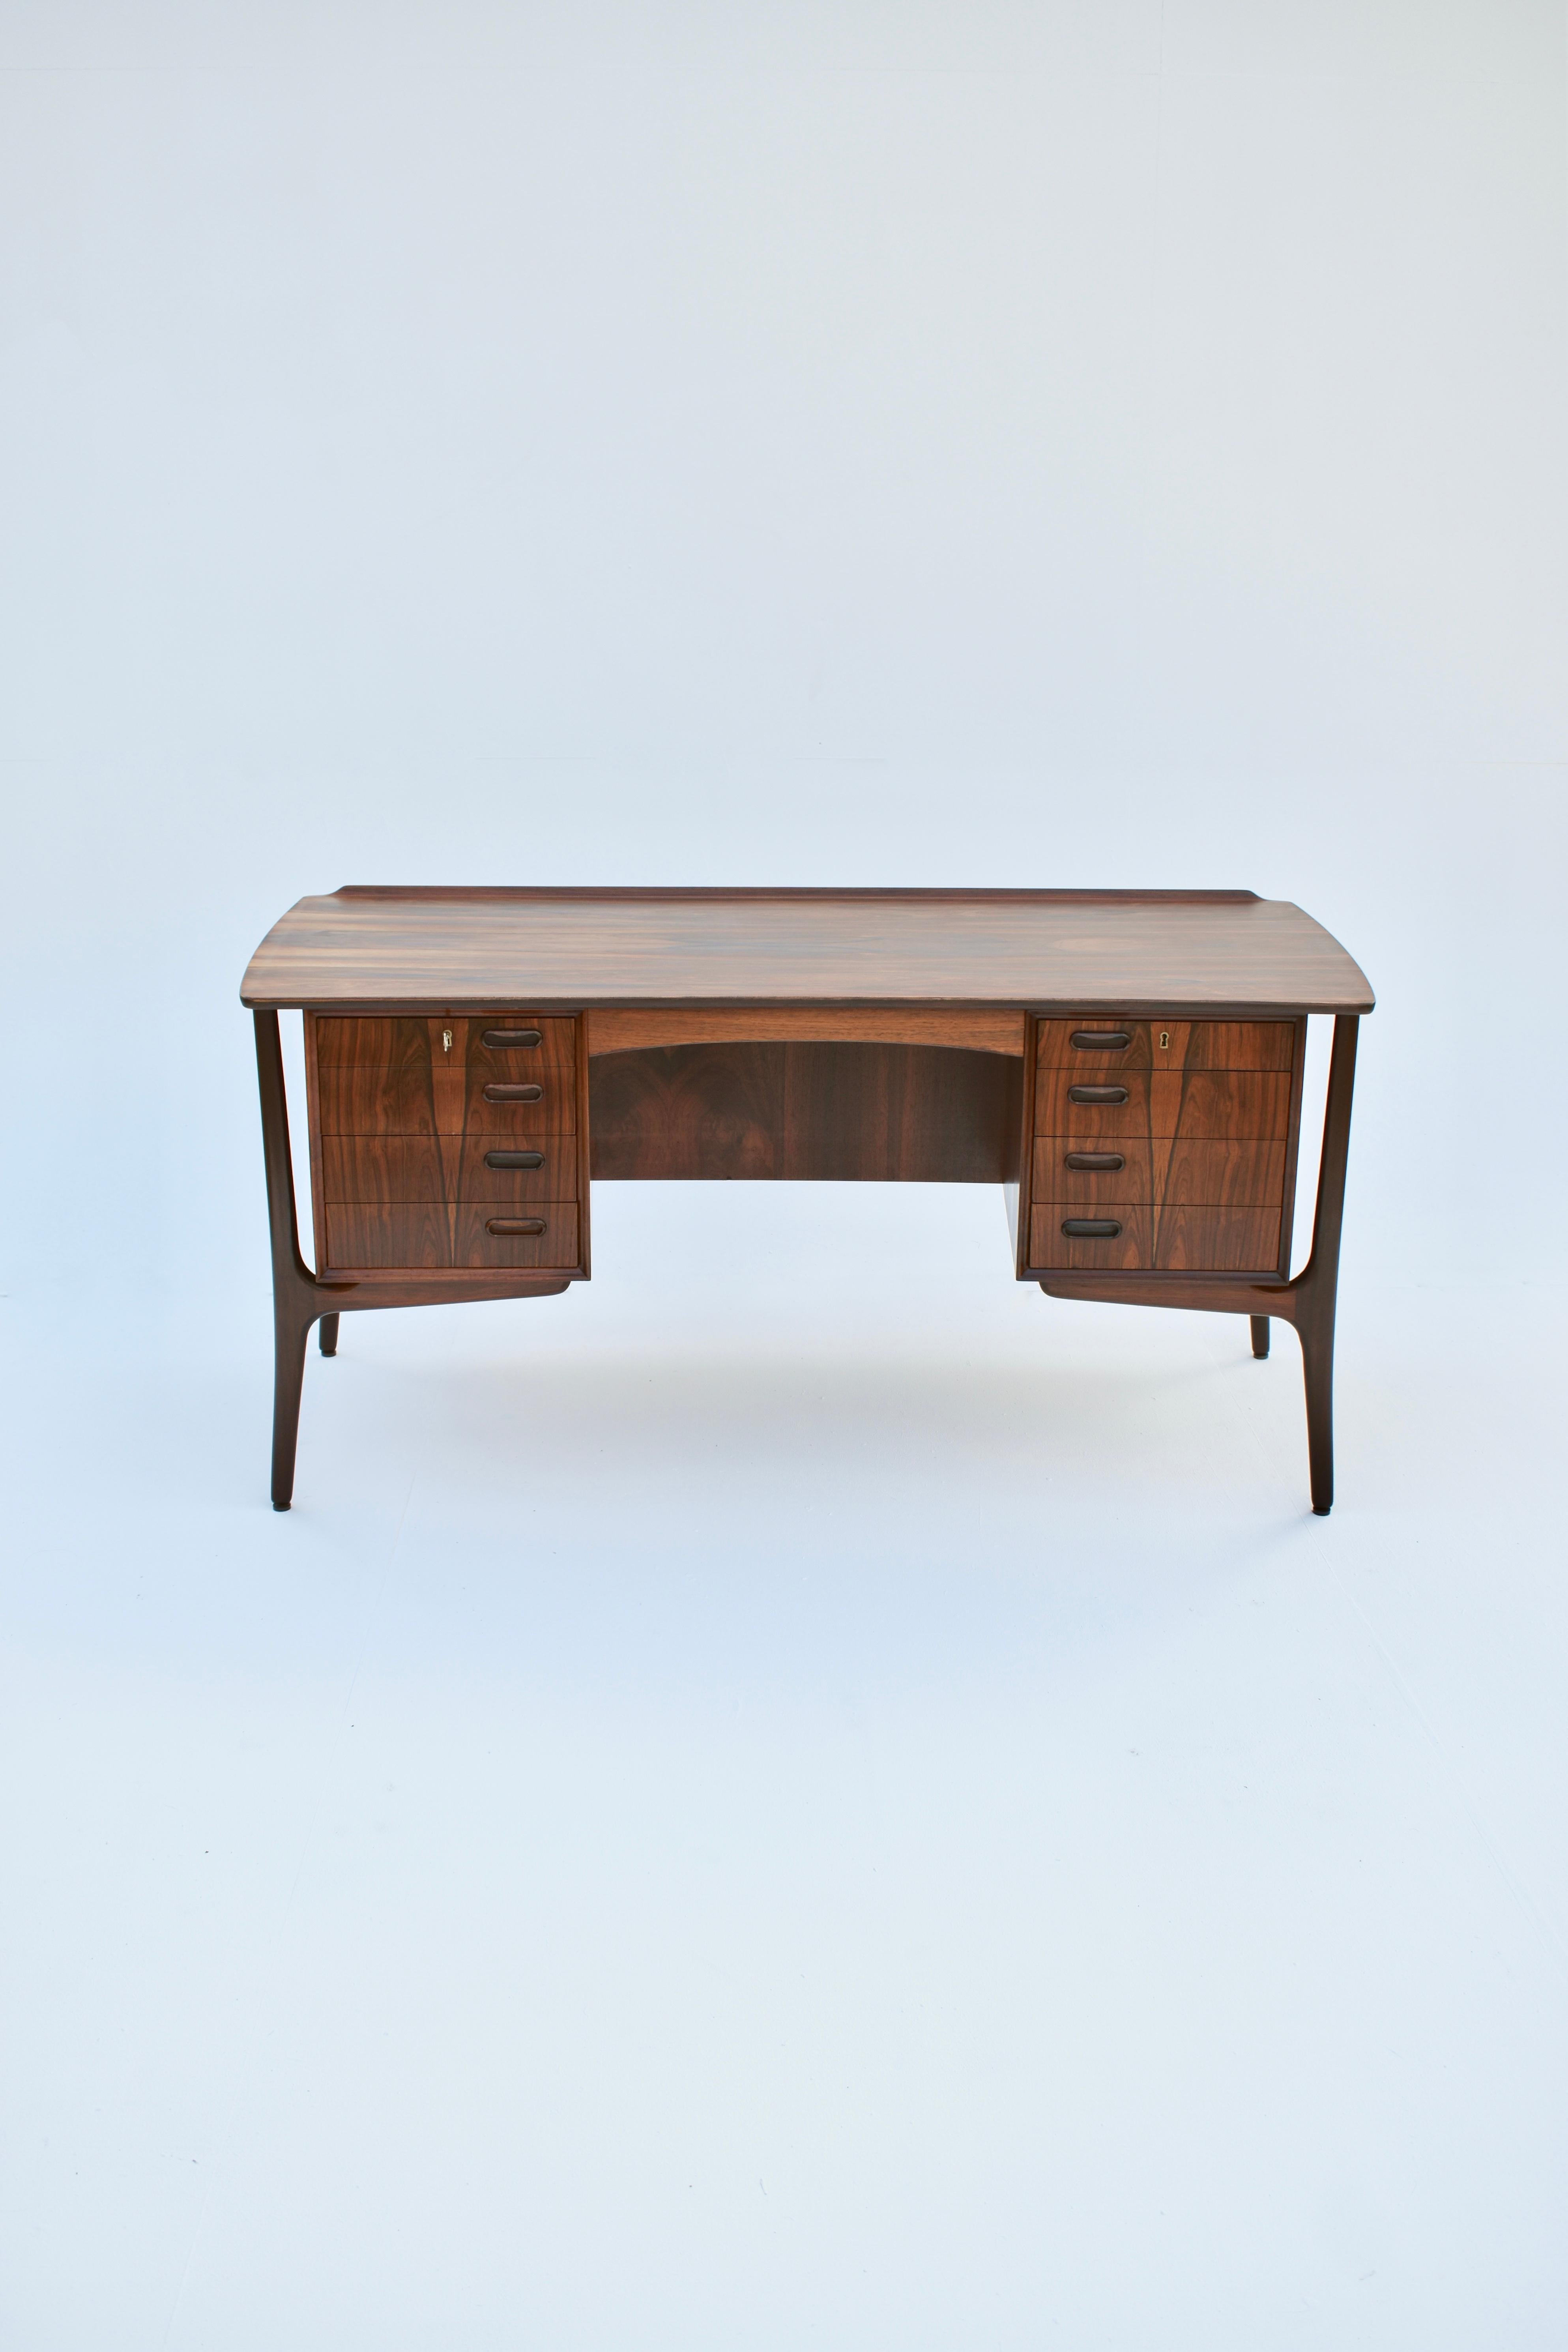 Spectacular double pedestal desk of the most elegant design executed in dramatic Brazilian rosewood. Featuring a beautiful curved desktop that wraps itself towards the sitter. To the opposite side of the surface a raised fin. Slender sculptural legs